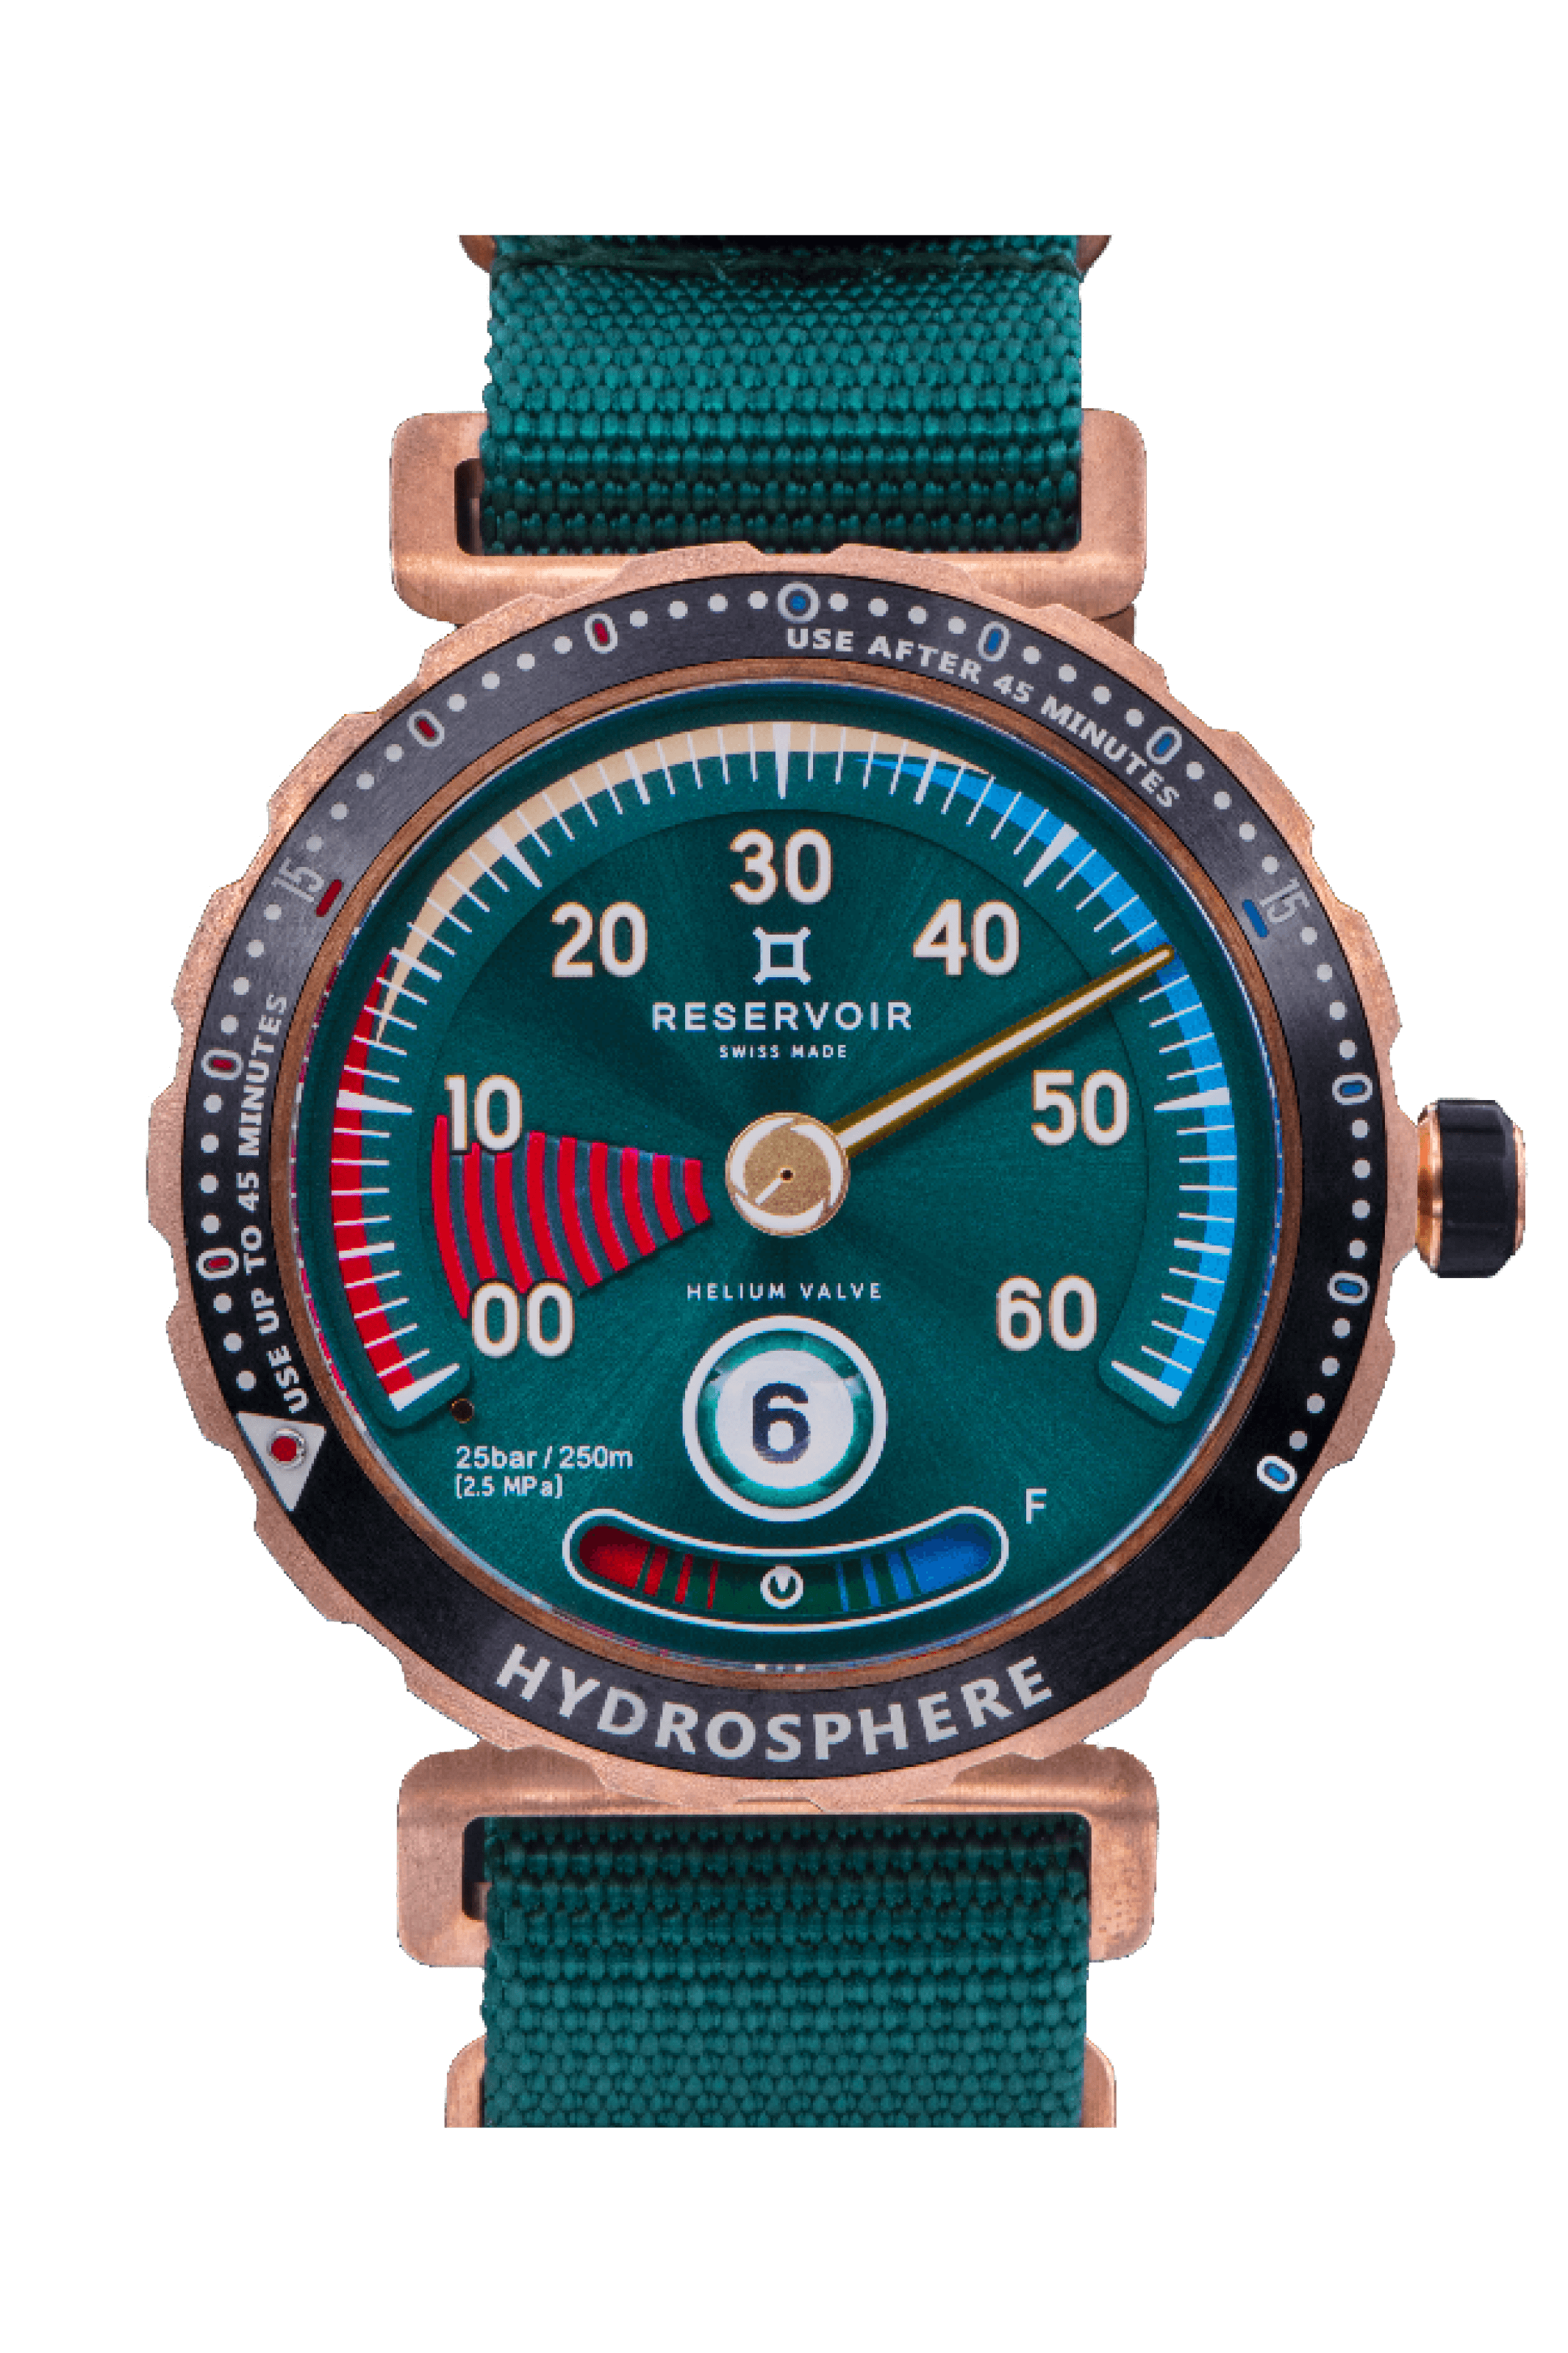 Luxury Watch with Diver and Manometer on Dark Navy, Light Beige and Light Blue Background.